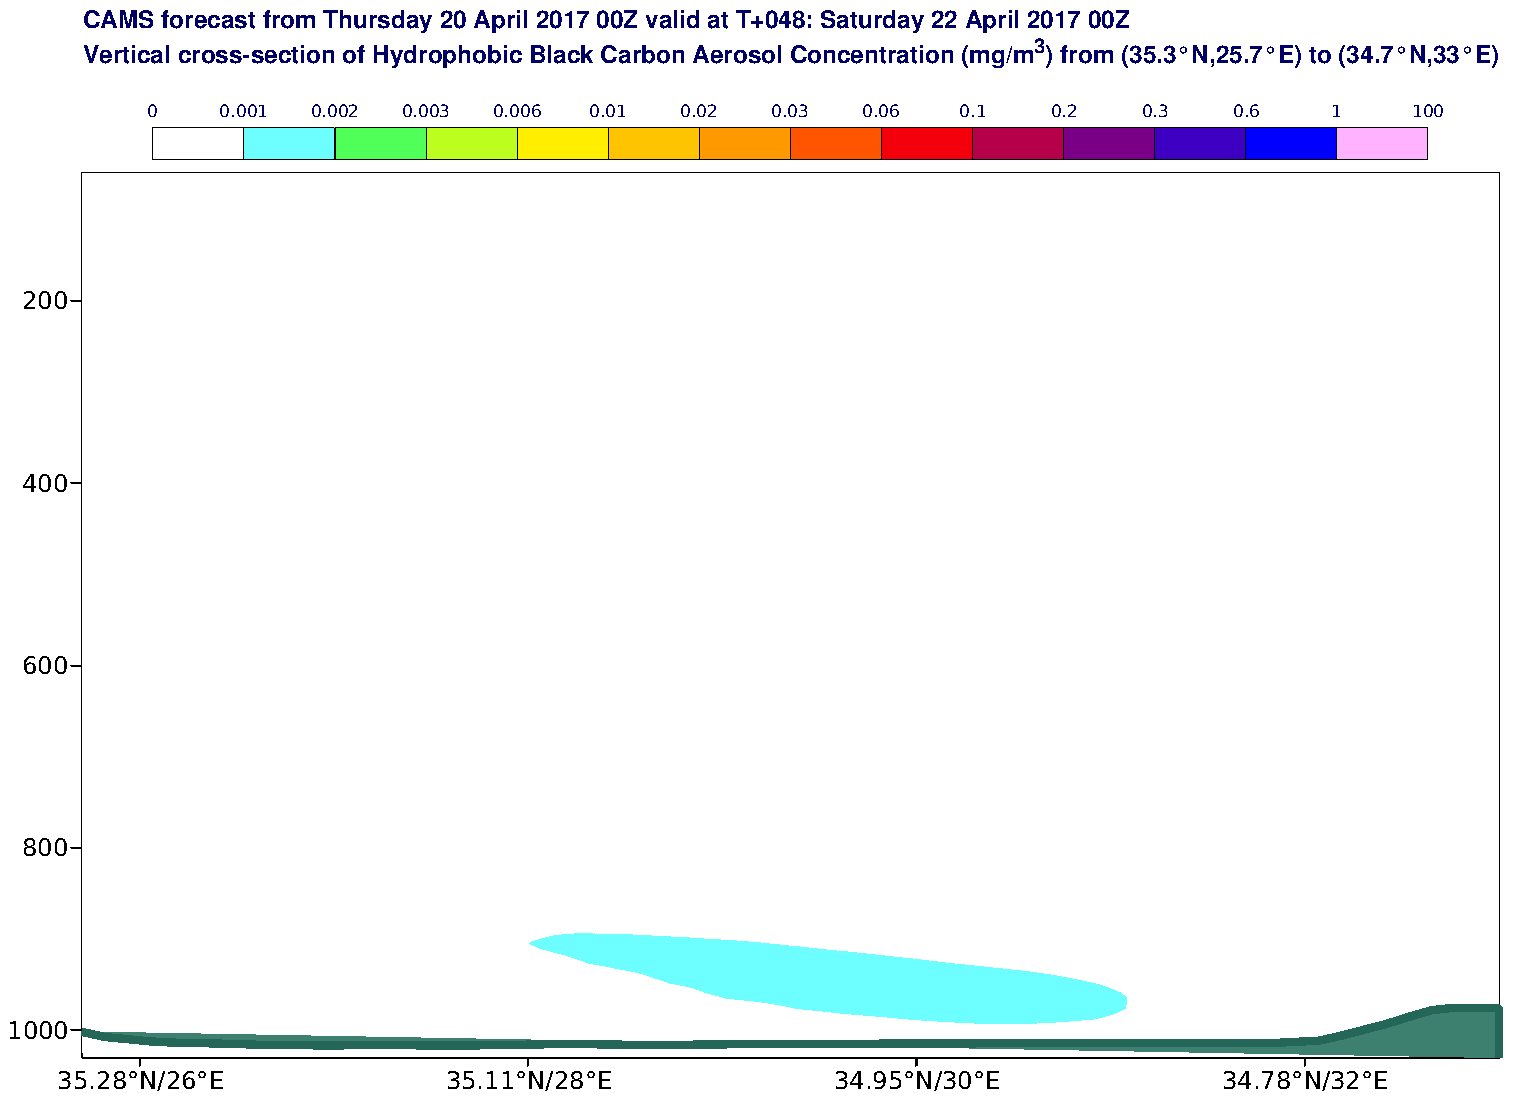 Vertical cross-section of Hydrophobic Black Carbon Aerosol Concentration (mg/m3) valid at T48 - 2017-04-22 00:00